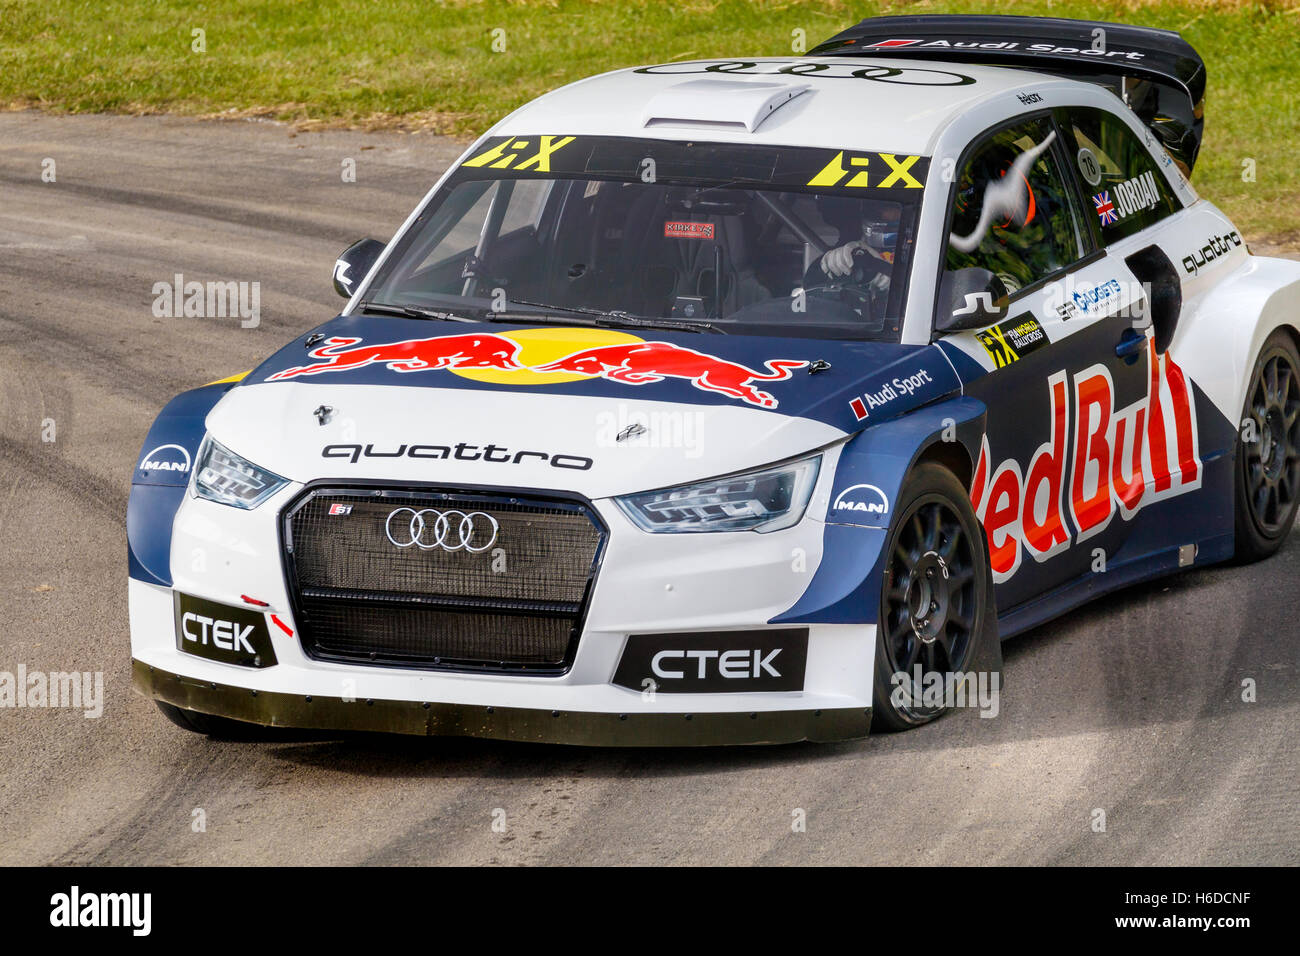 2016 Audi S1 EKS RX rallycross car with driver Andrew Jordan at the 2016  Goodwood Festival of Speed, Sussex, UK Stock Photo - Alamy